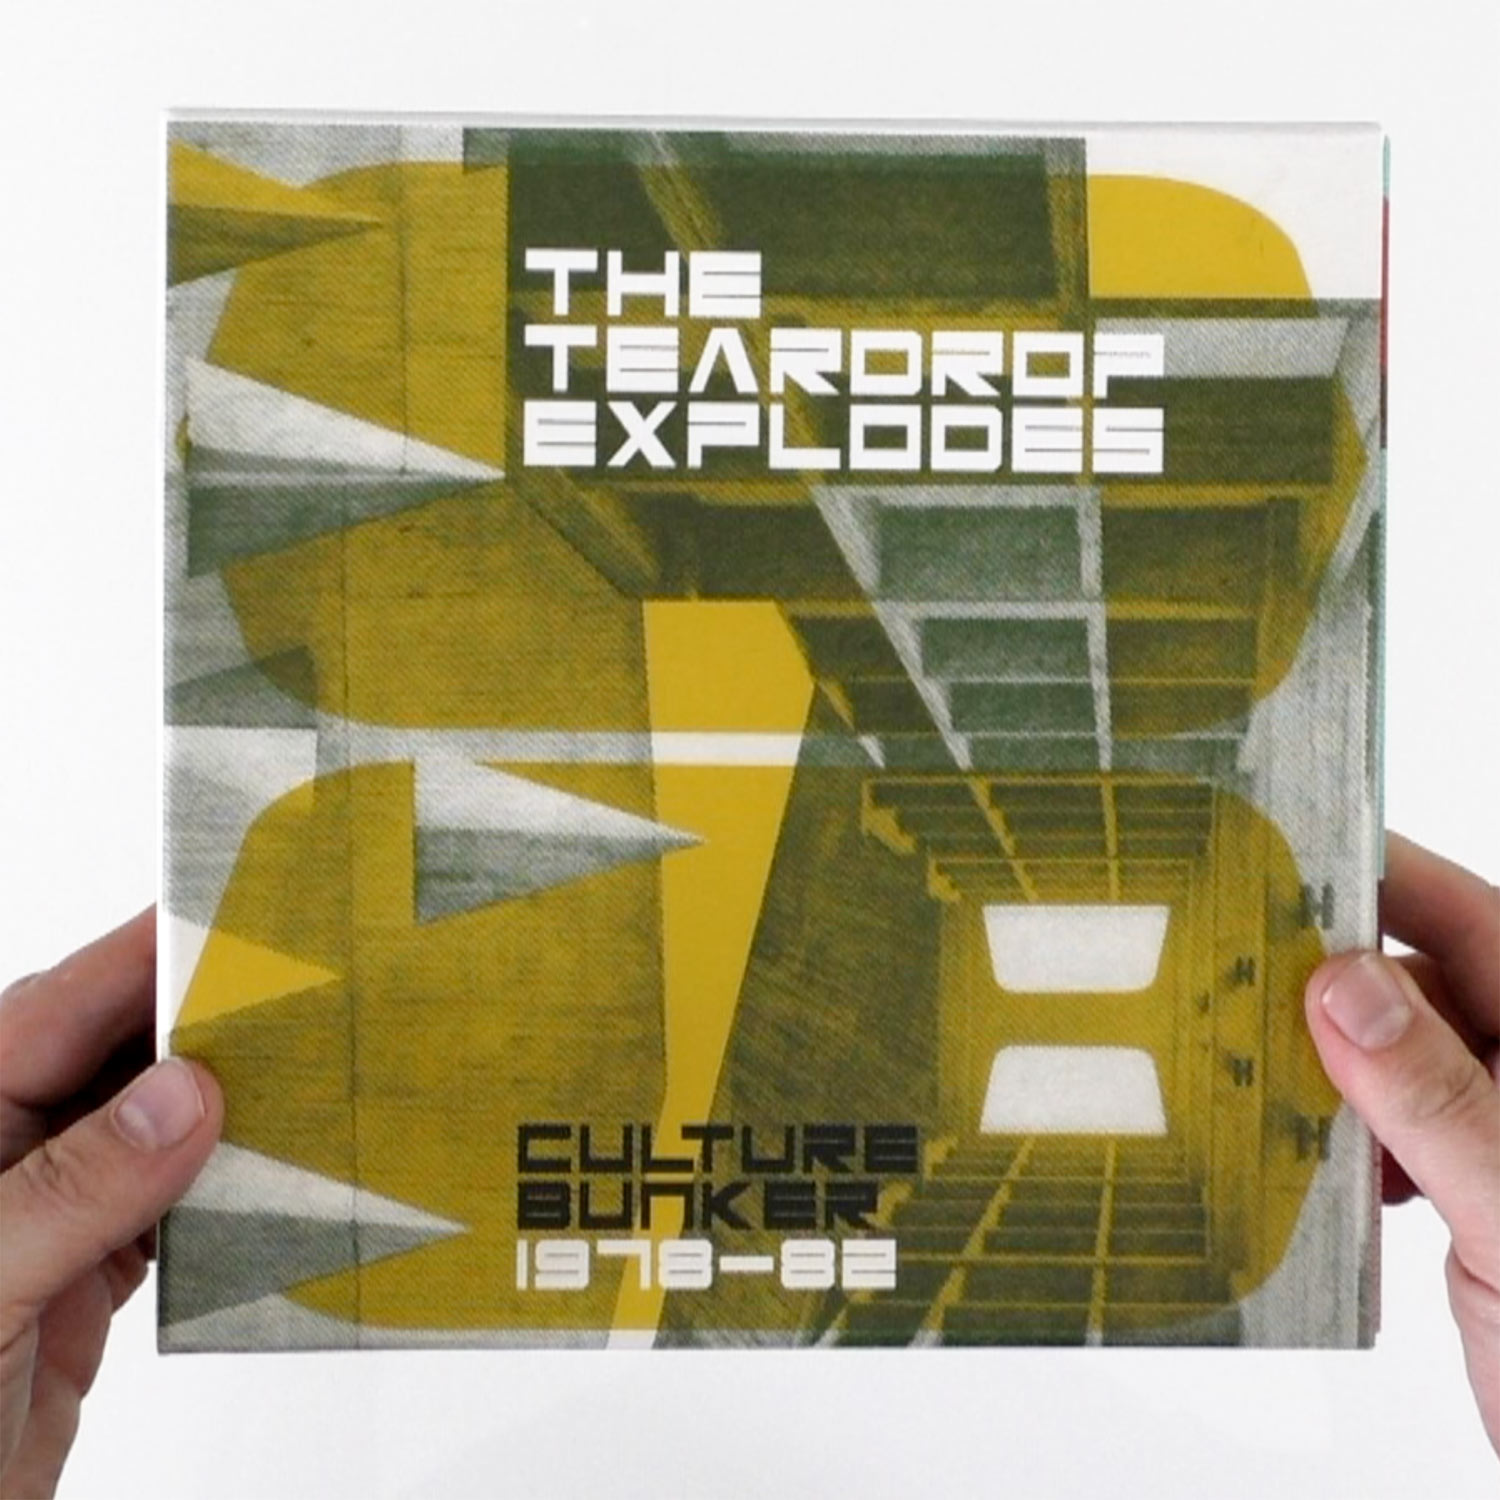 The Teardrop Explodes / Culture Bunker 1978-1982 unboxing video